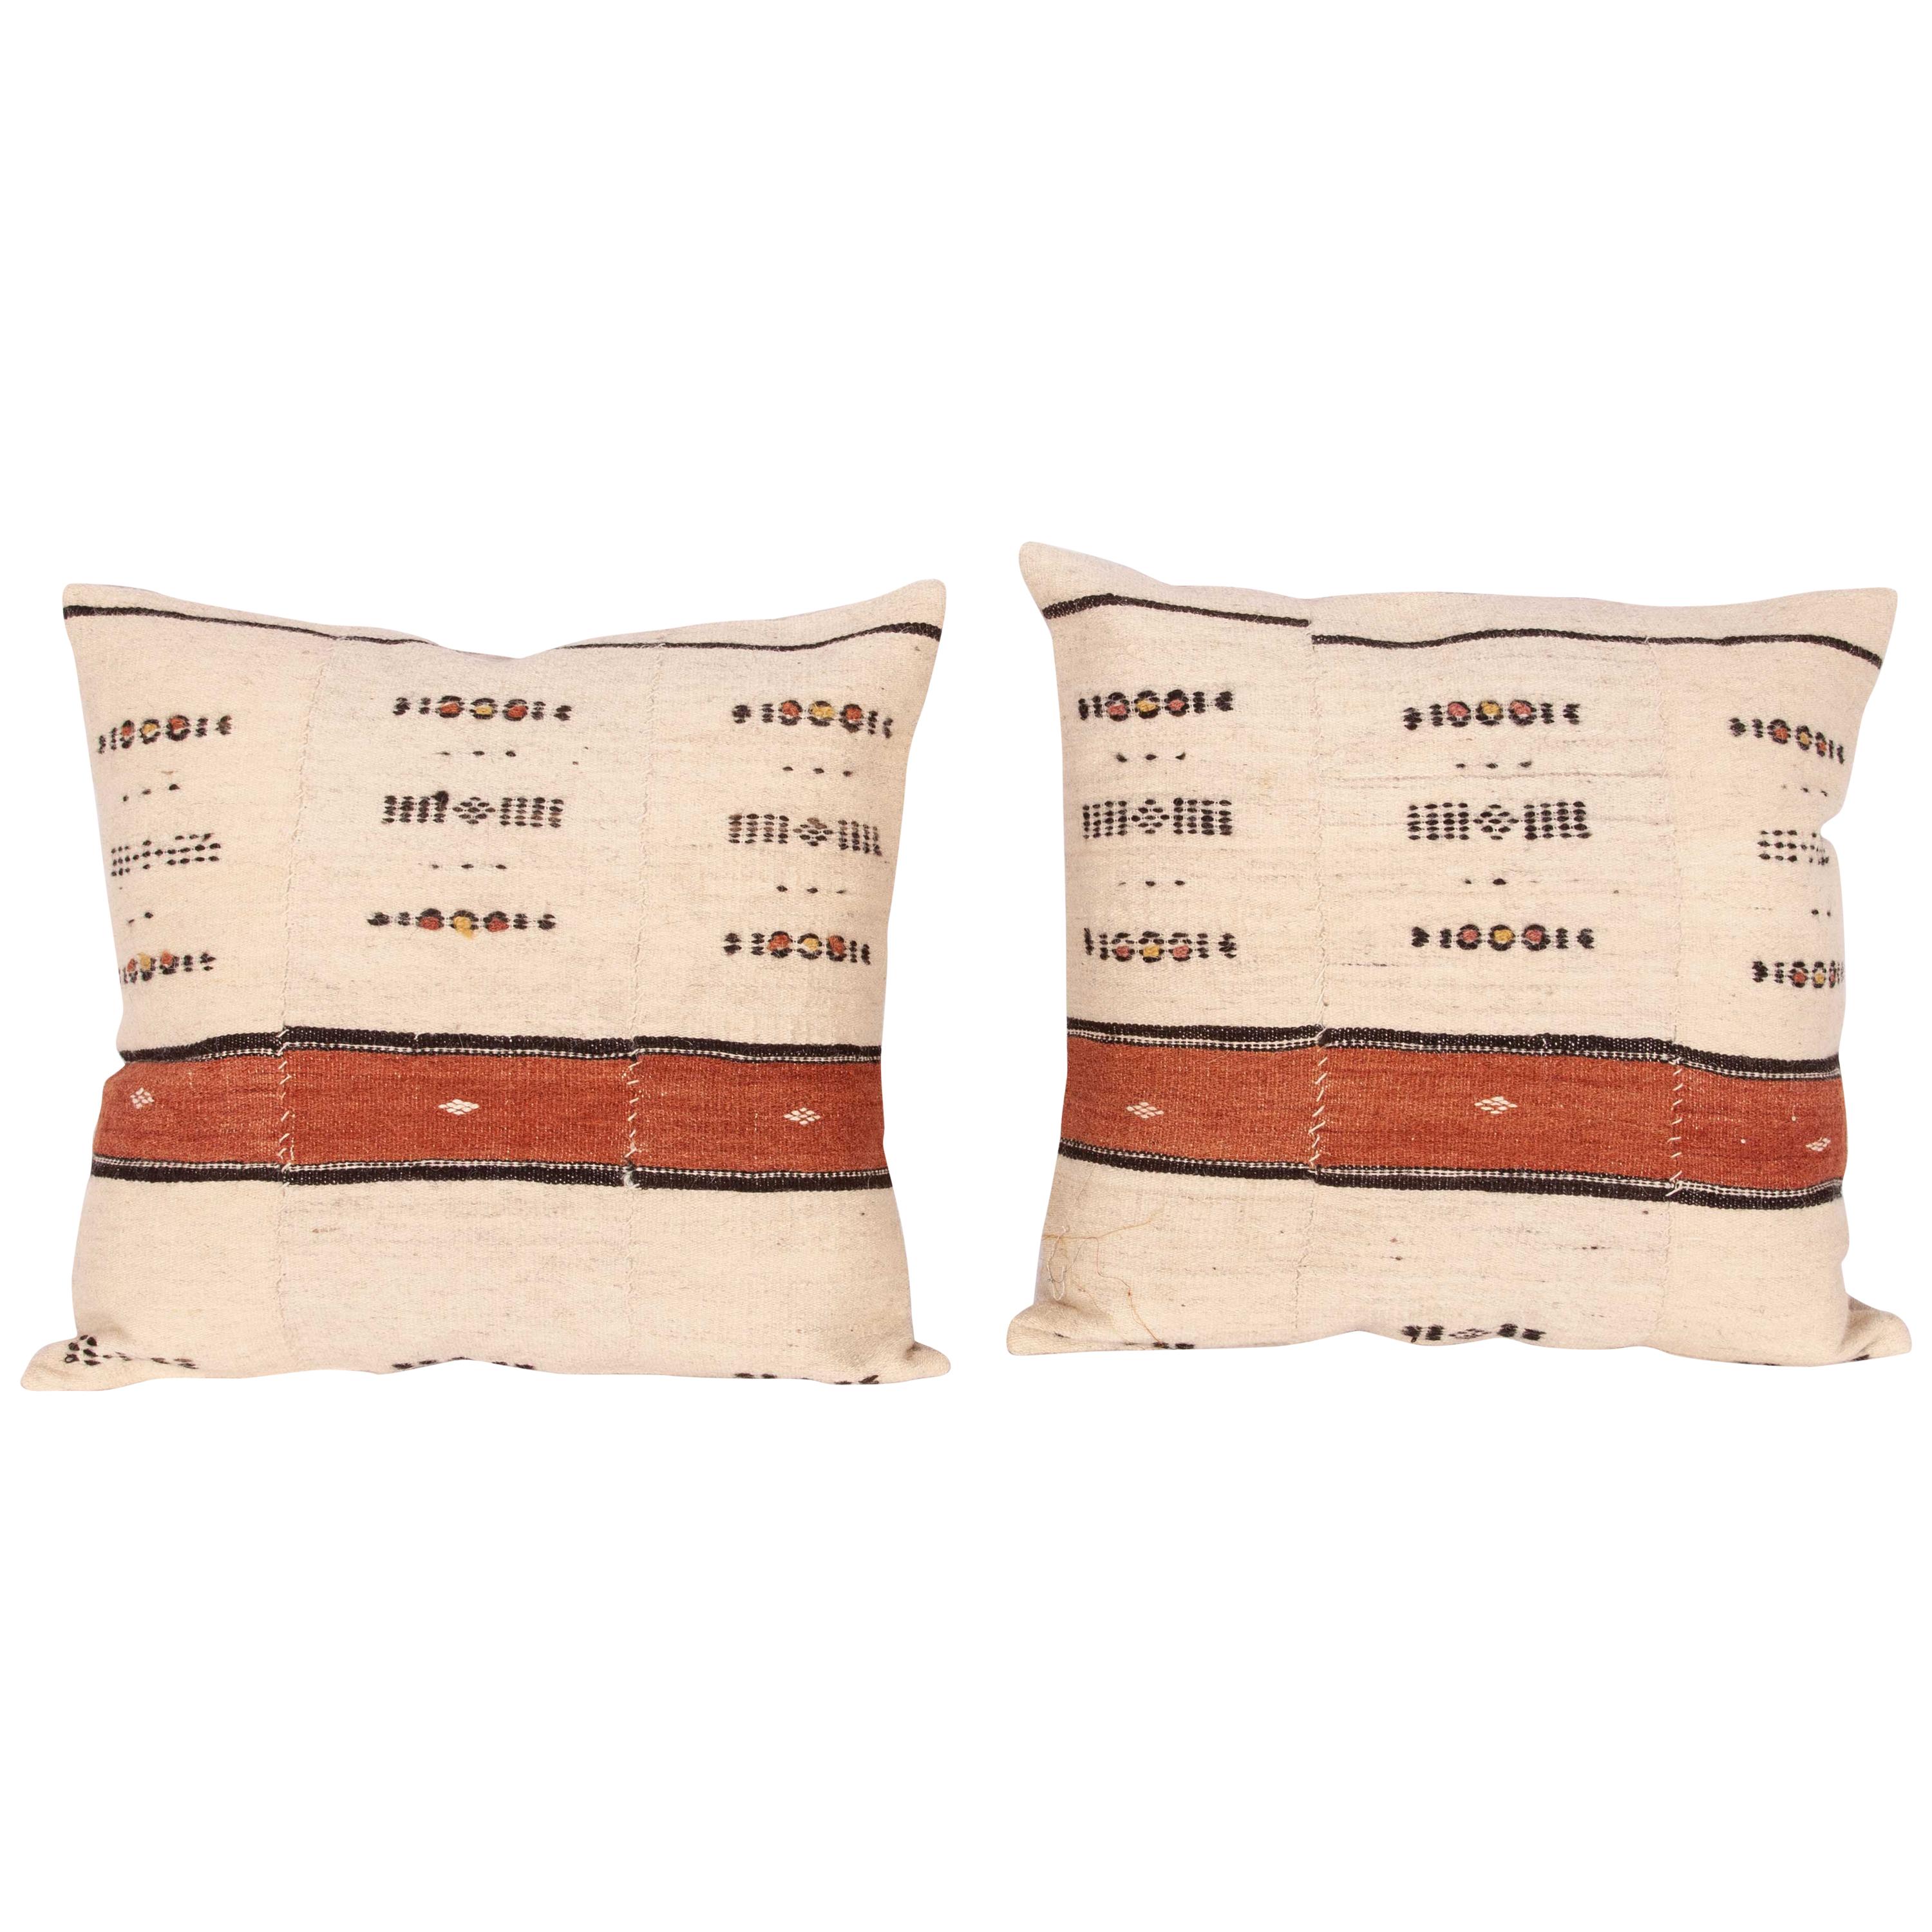 Fulani Pillow Covers from Mali, Africa, Mid-20th Century